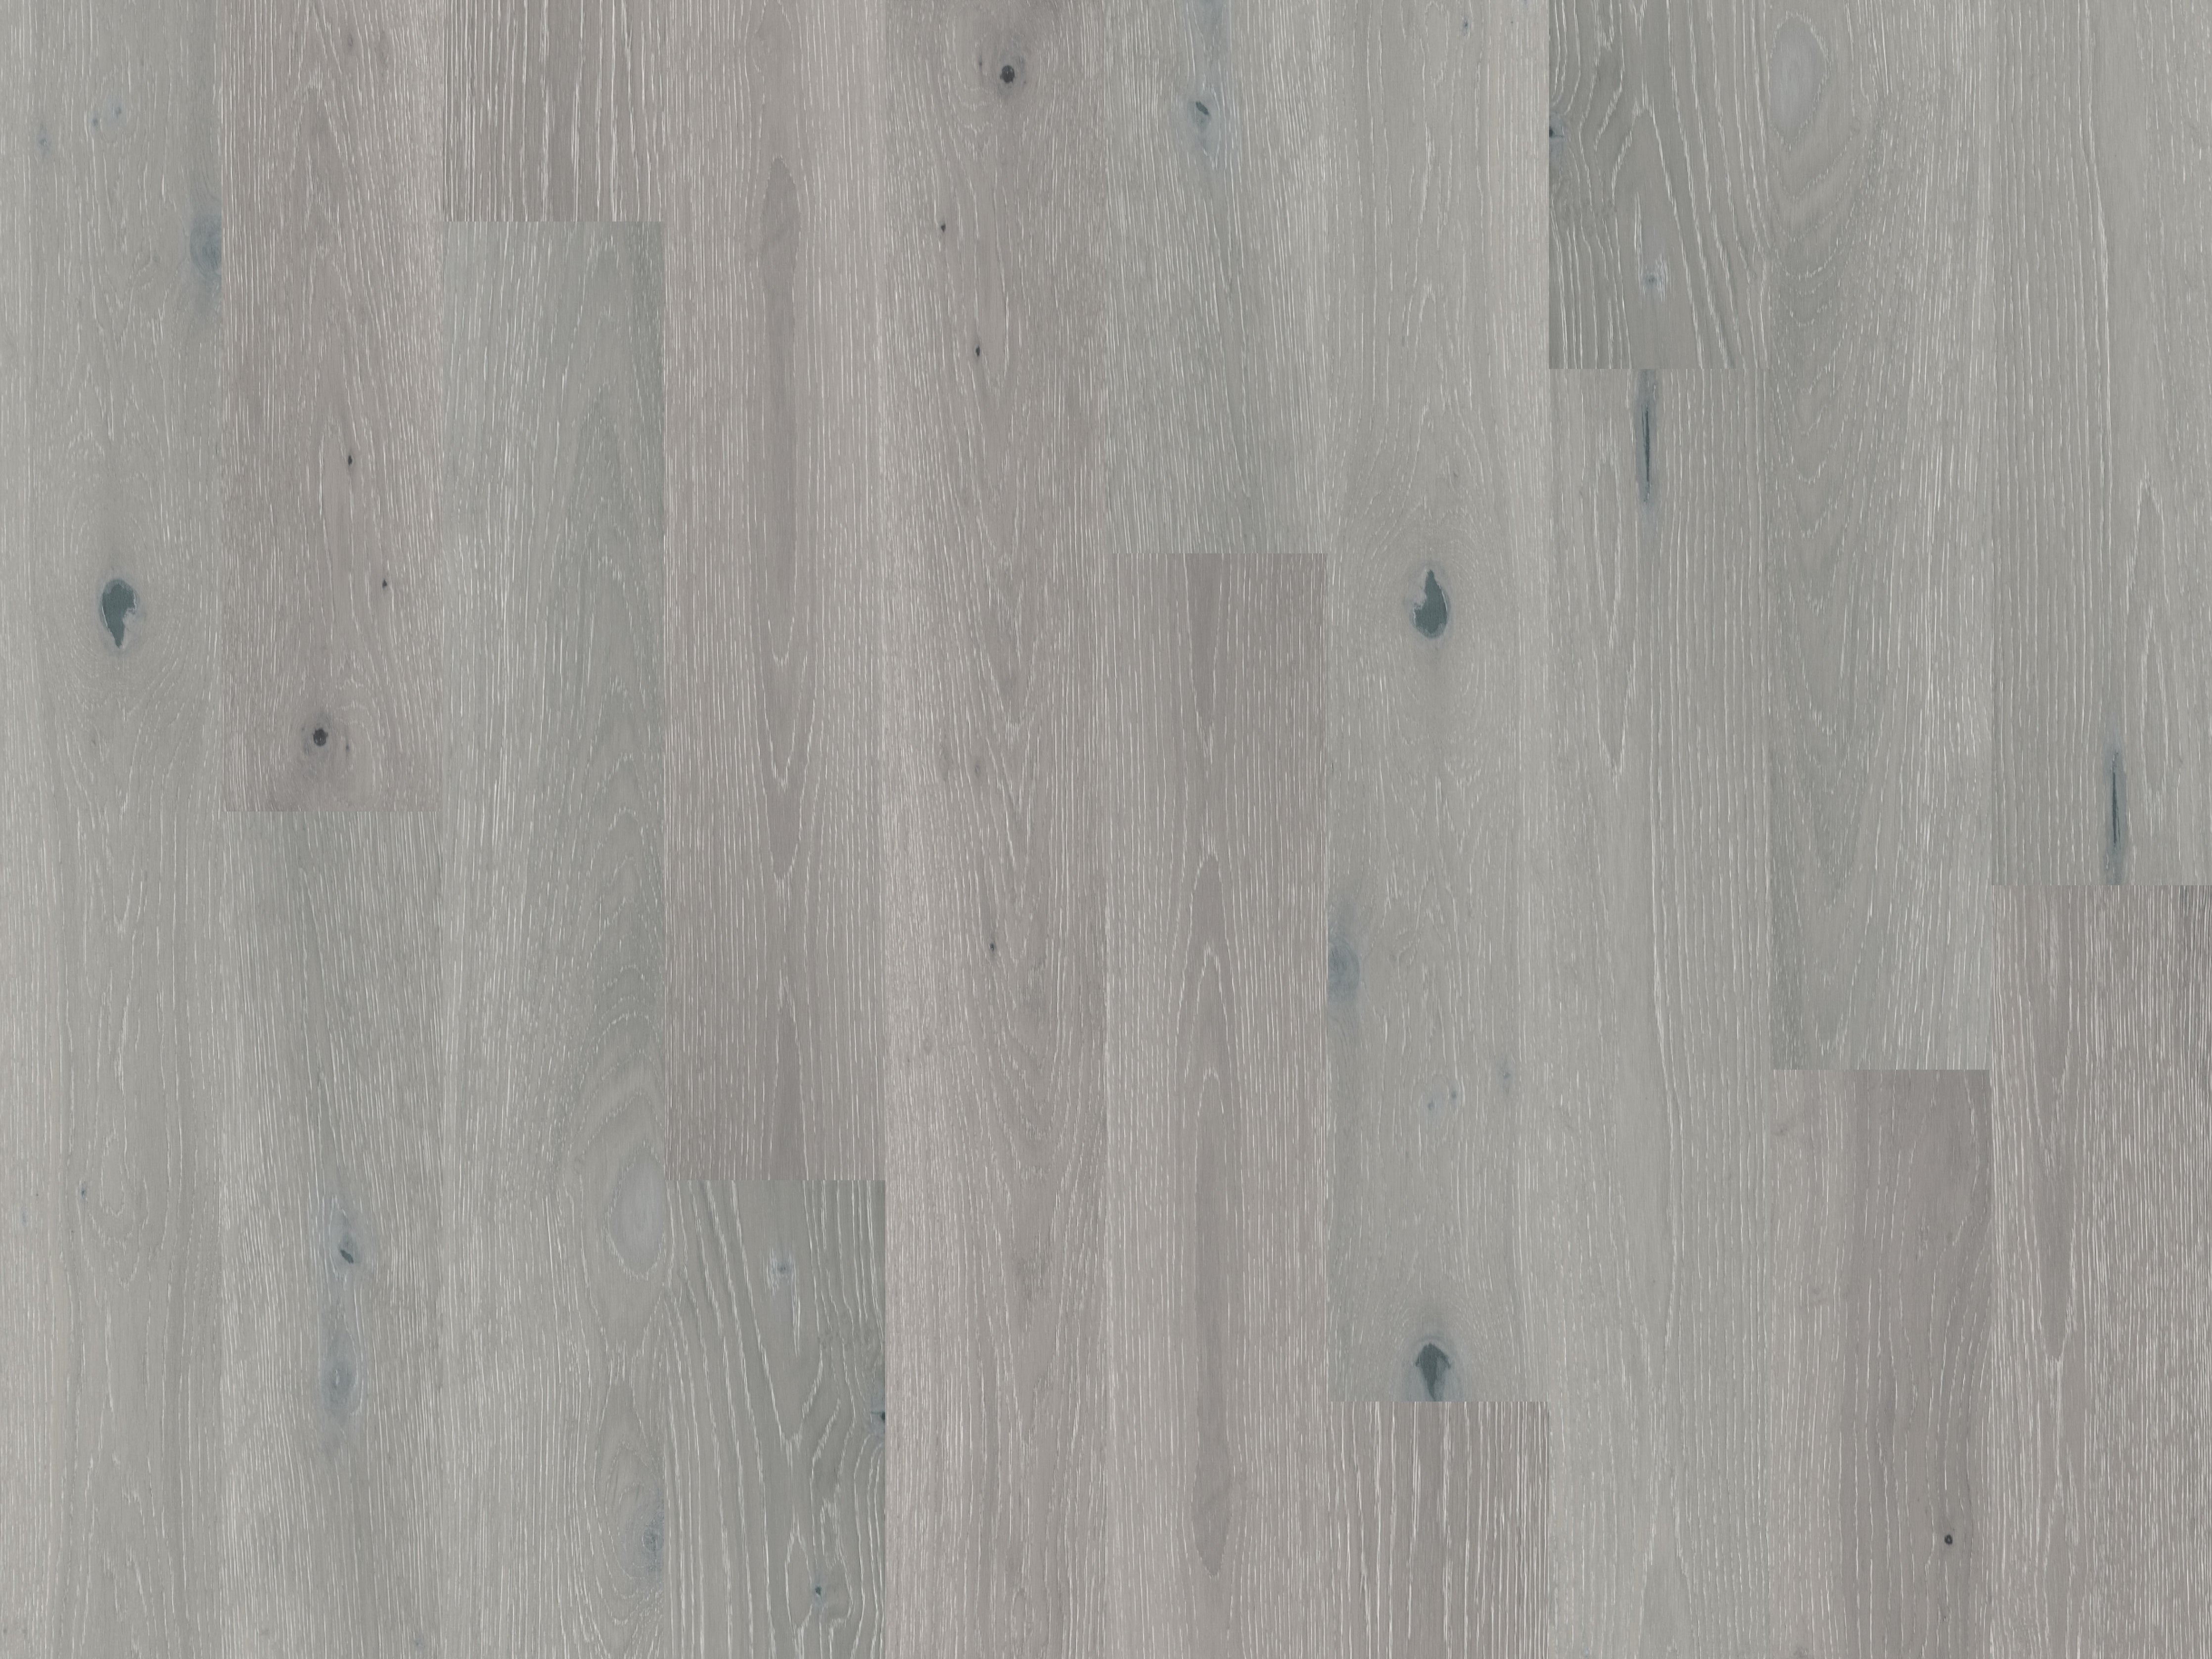 duchateau the guild lineage kayla european oak engineered hardnatural wood floor uv lacquer finish for interior use distributed by surface group international